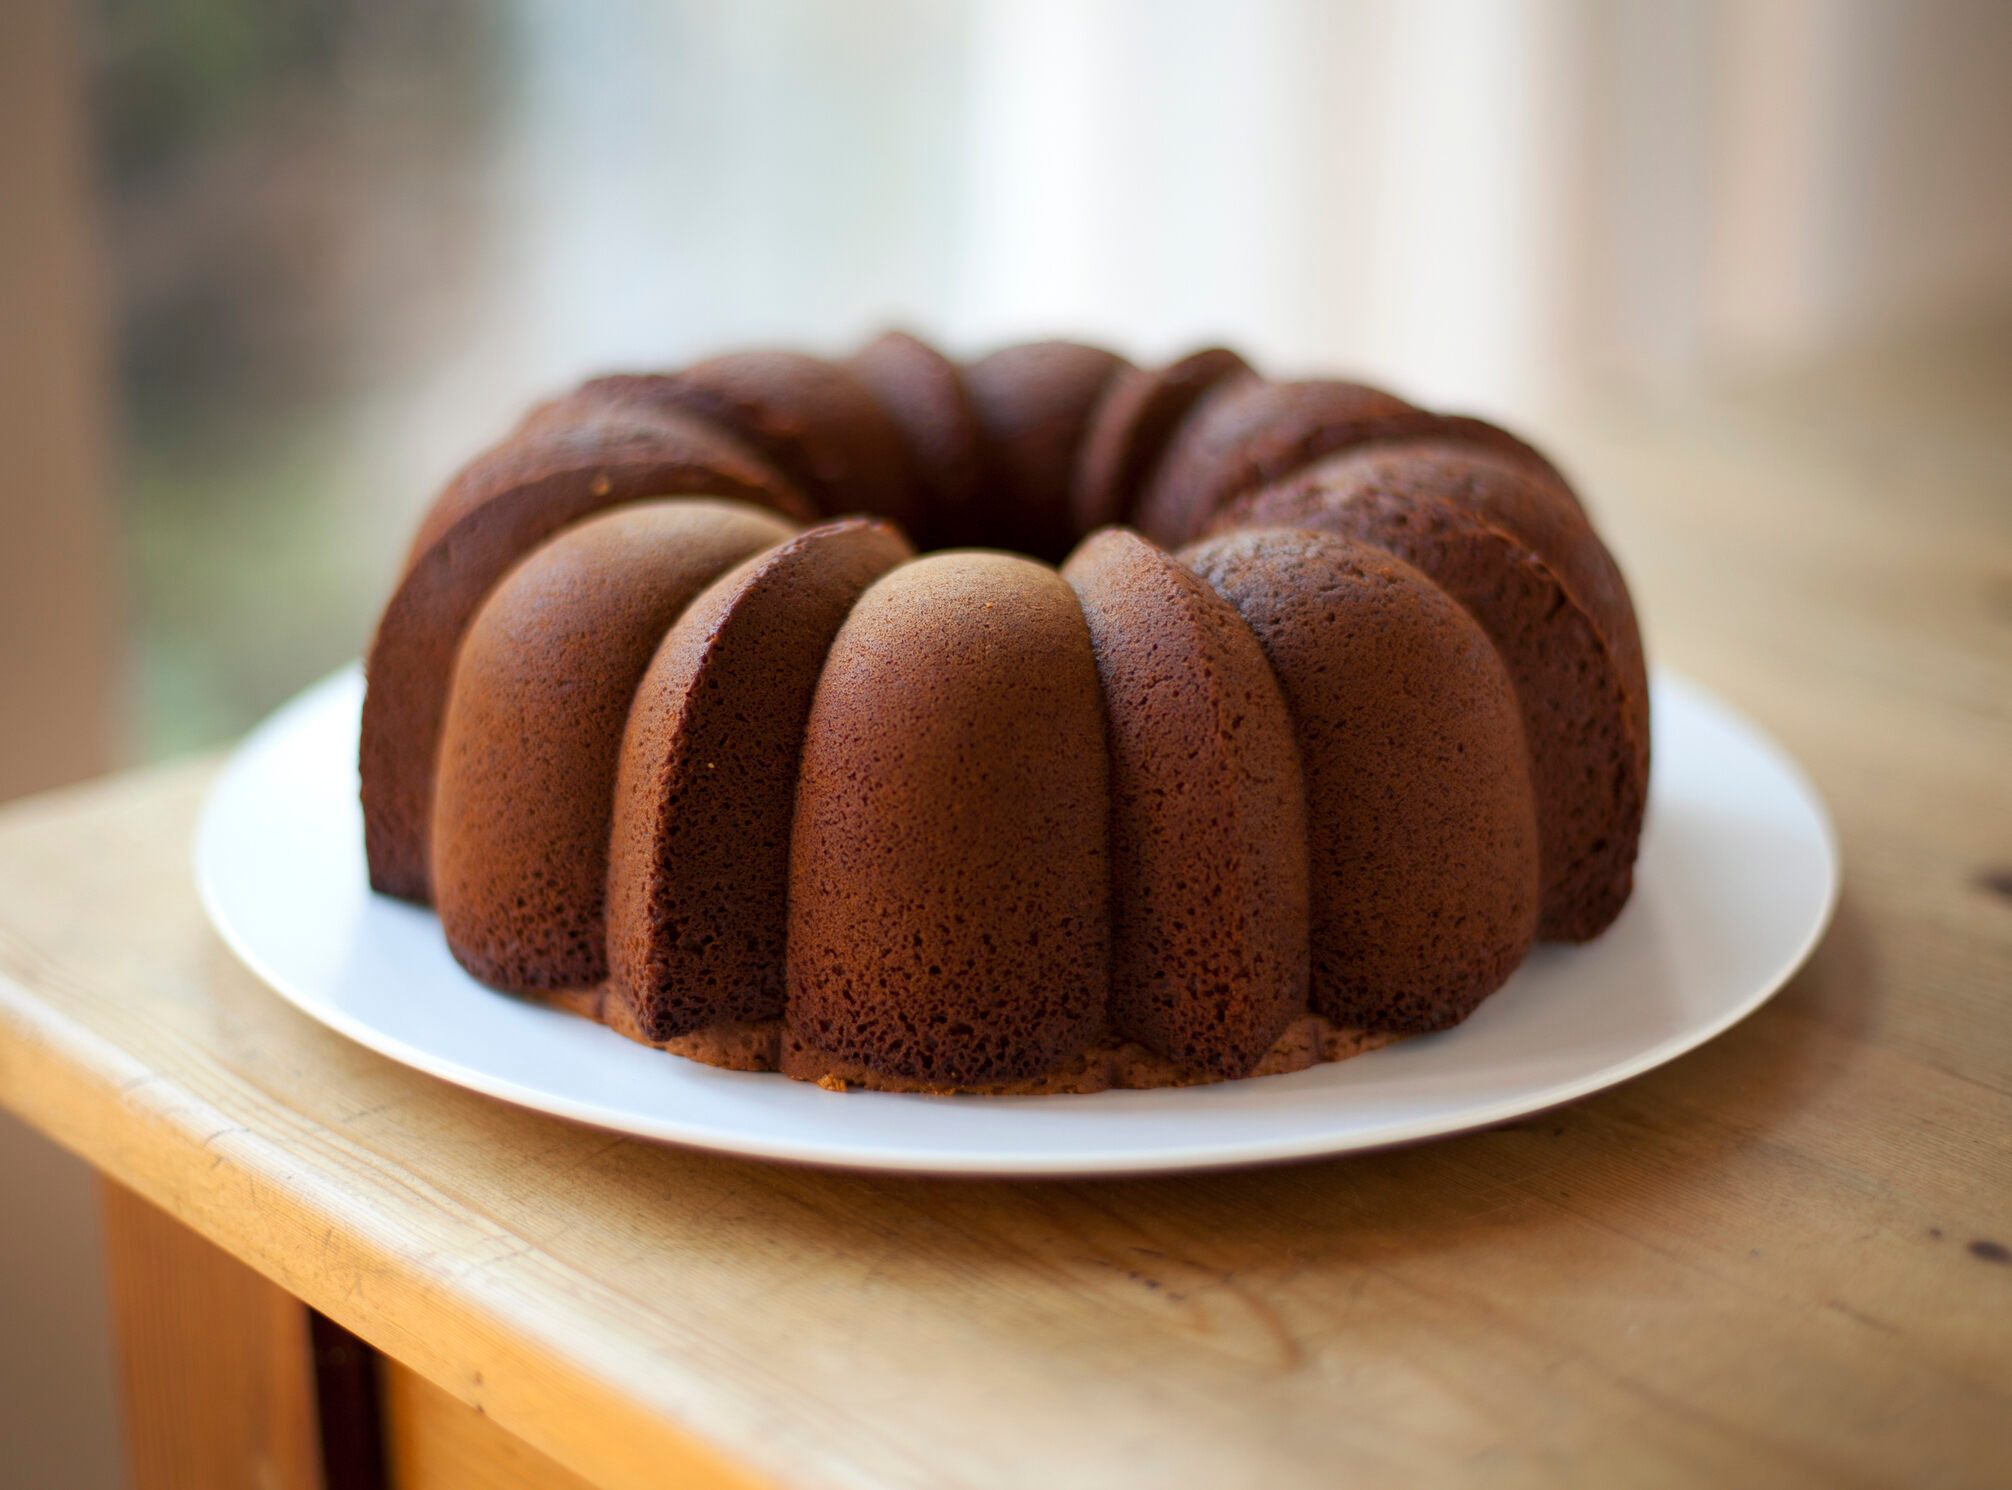 Bundt cakes manage to be sleek and homey at the same time.